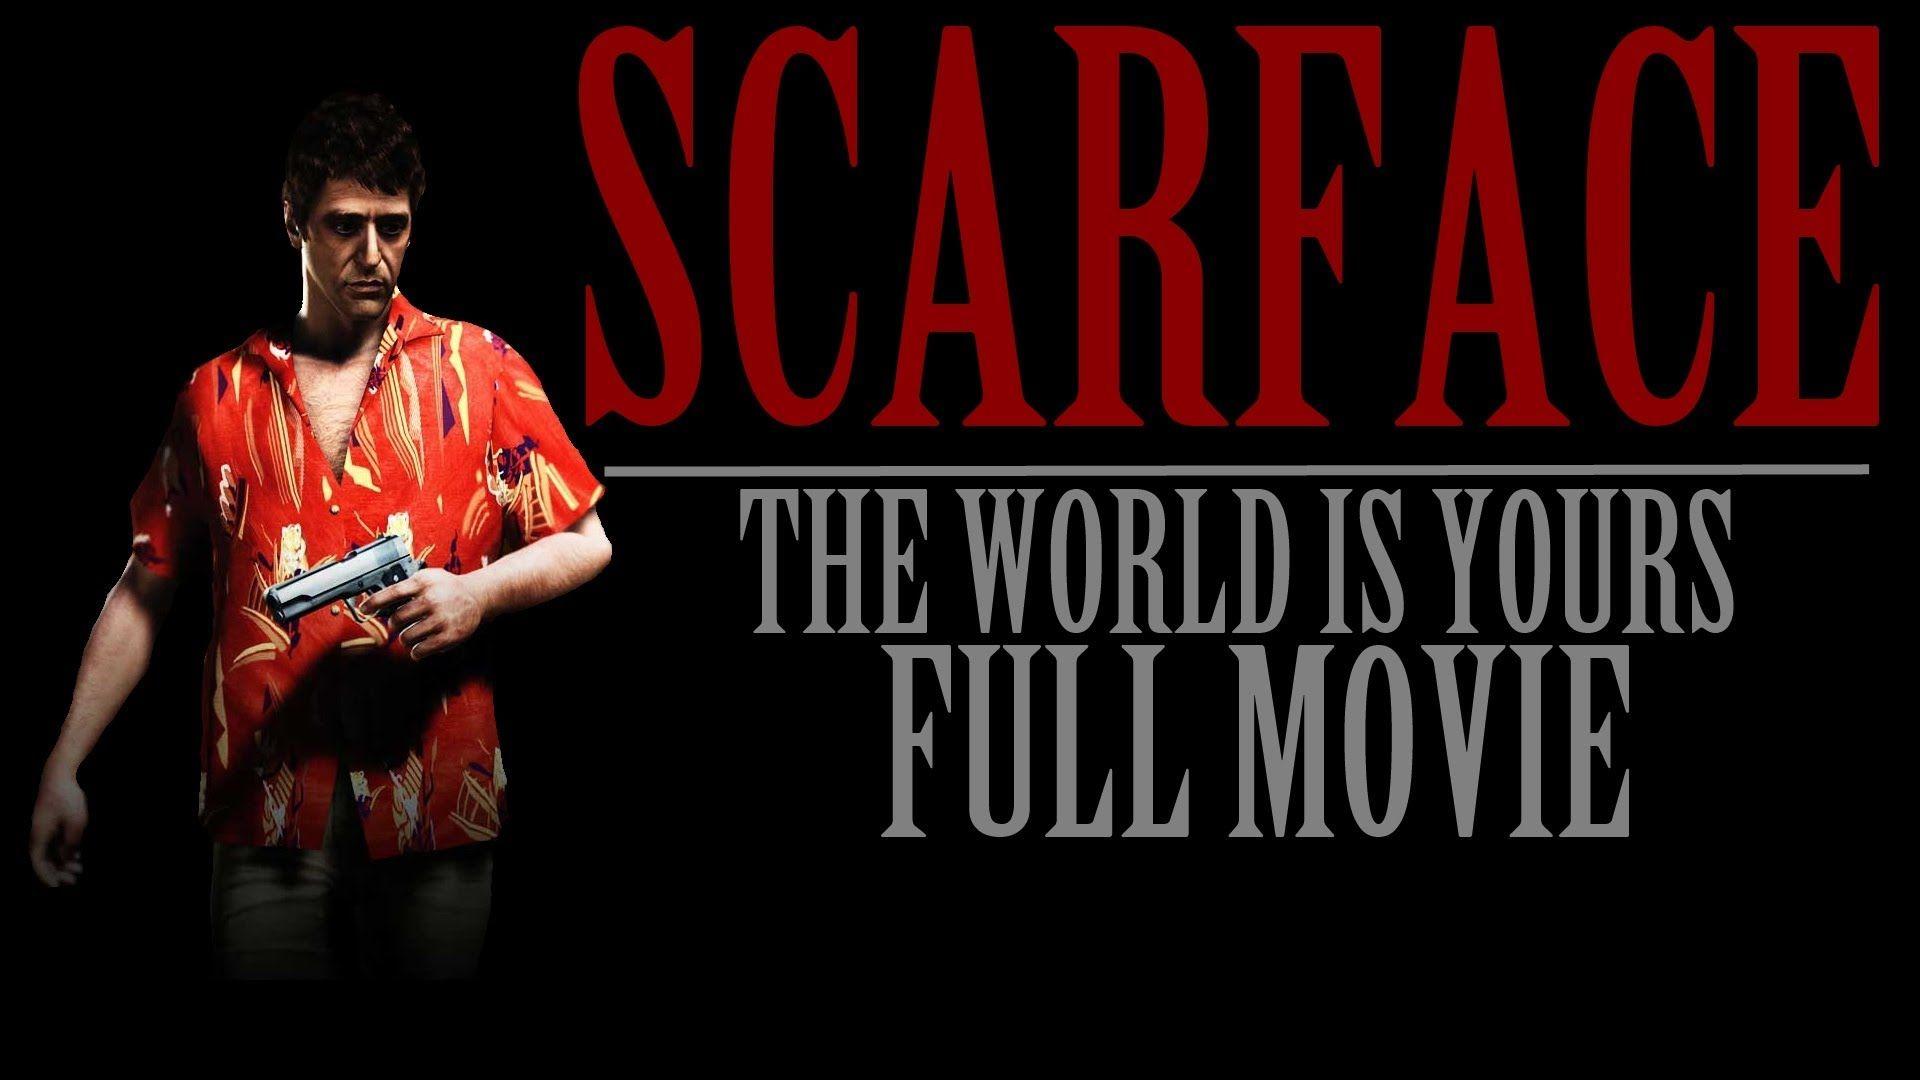 Scarface The World Is Yours: Full Movie